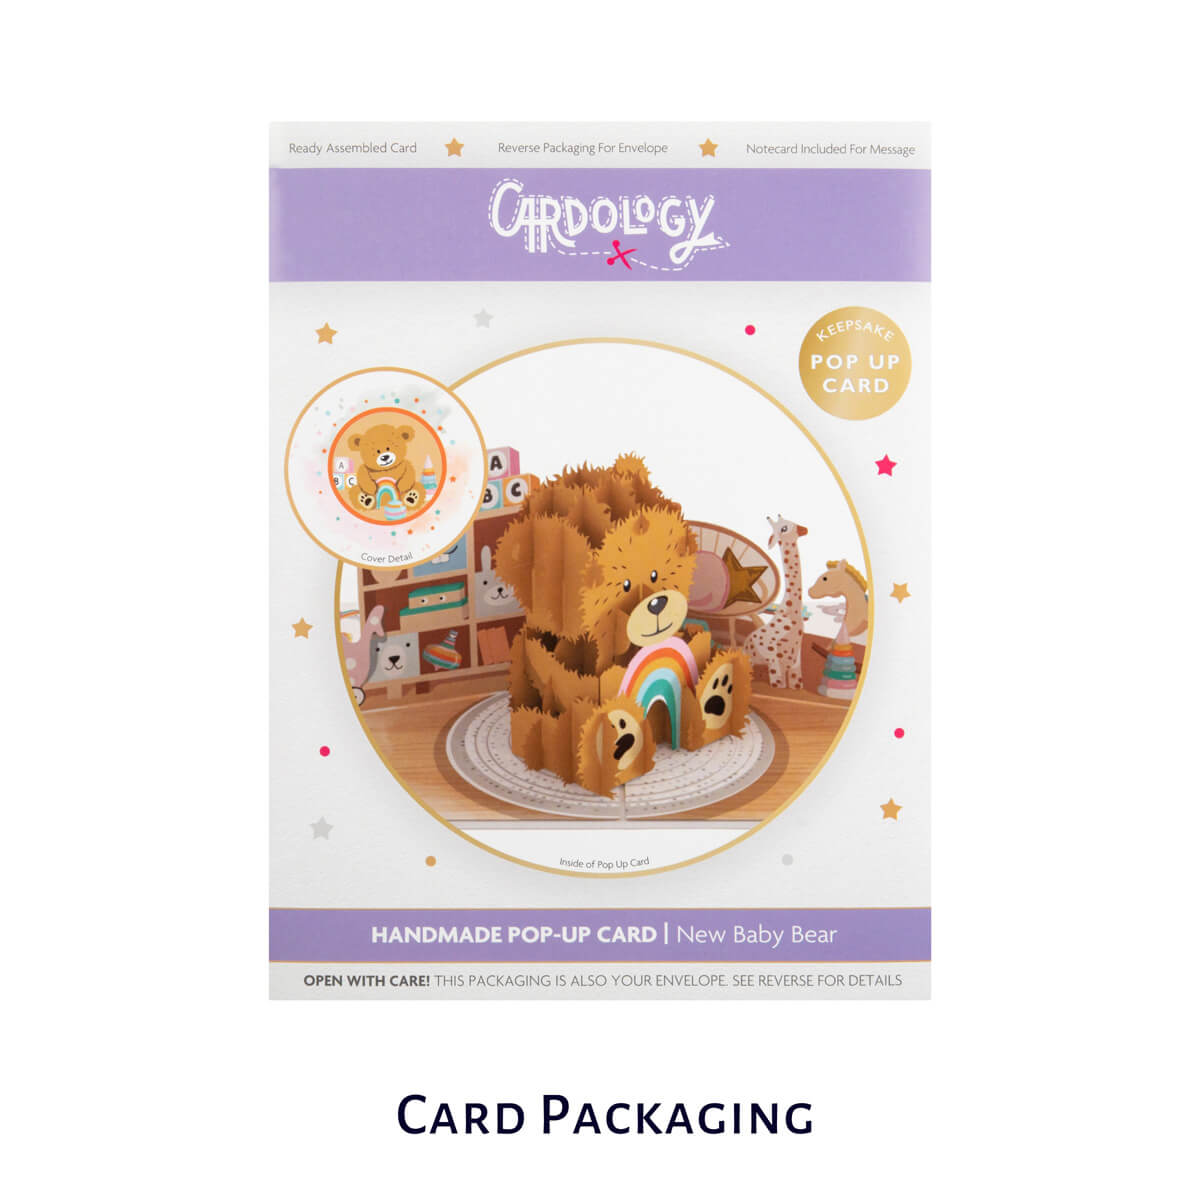 image of Cardology New Baby Bear Pop Up Card packaging which converts into a reversible envelope